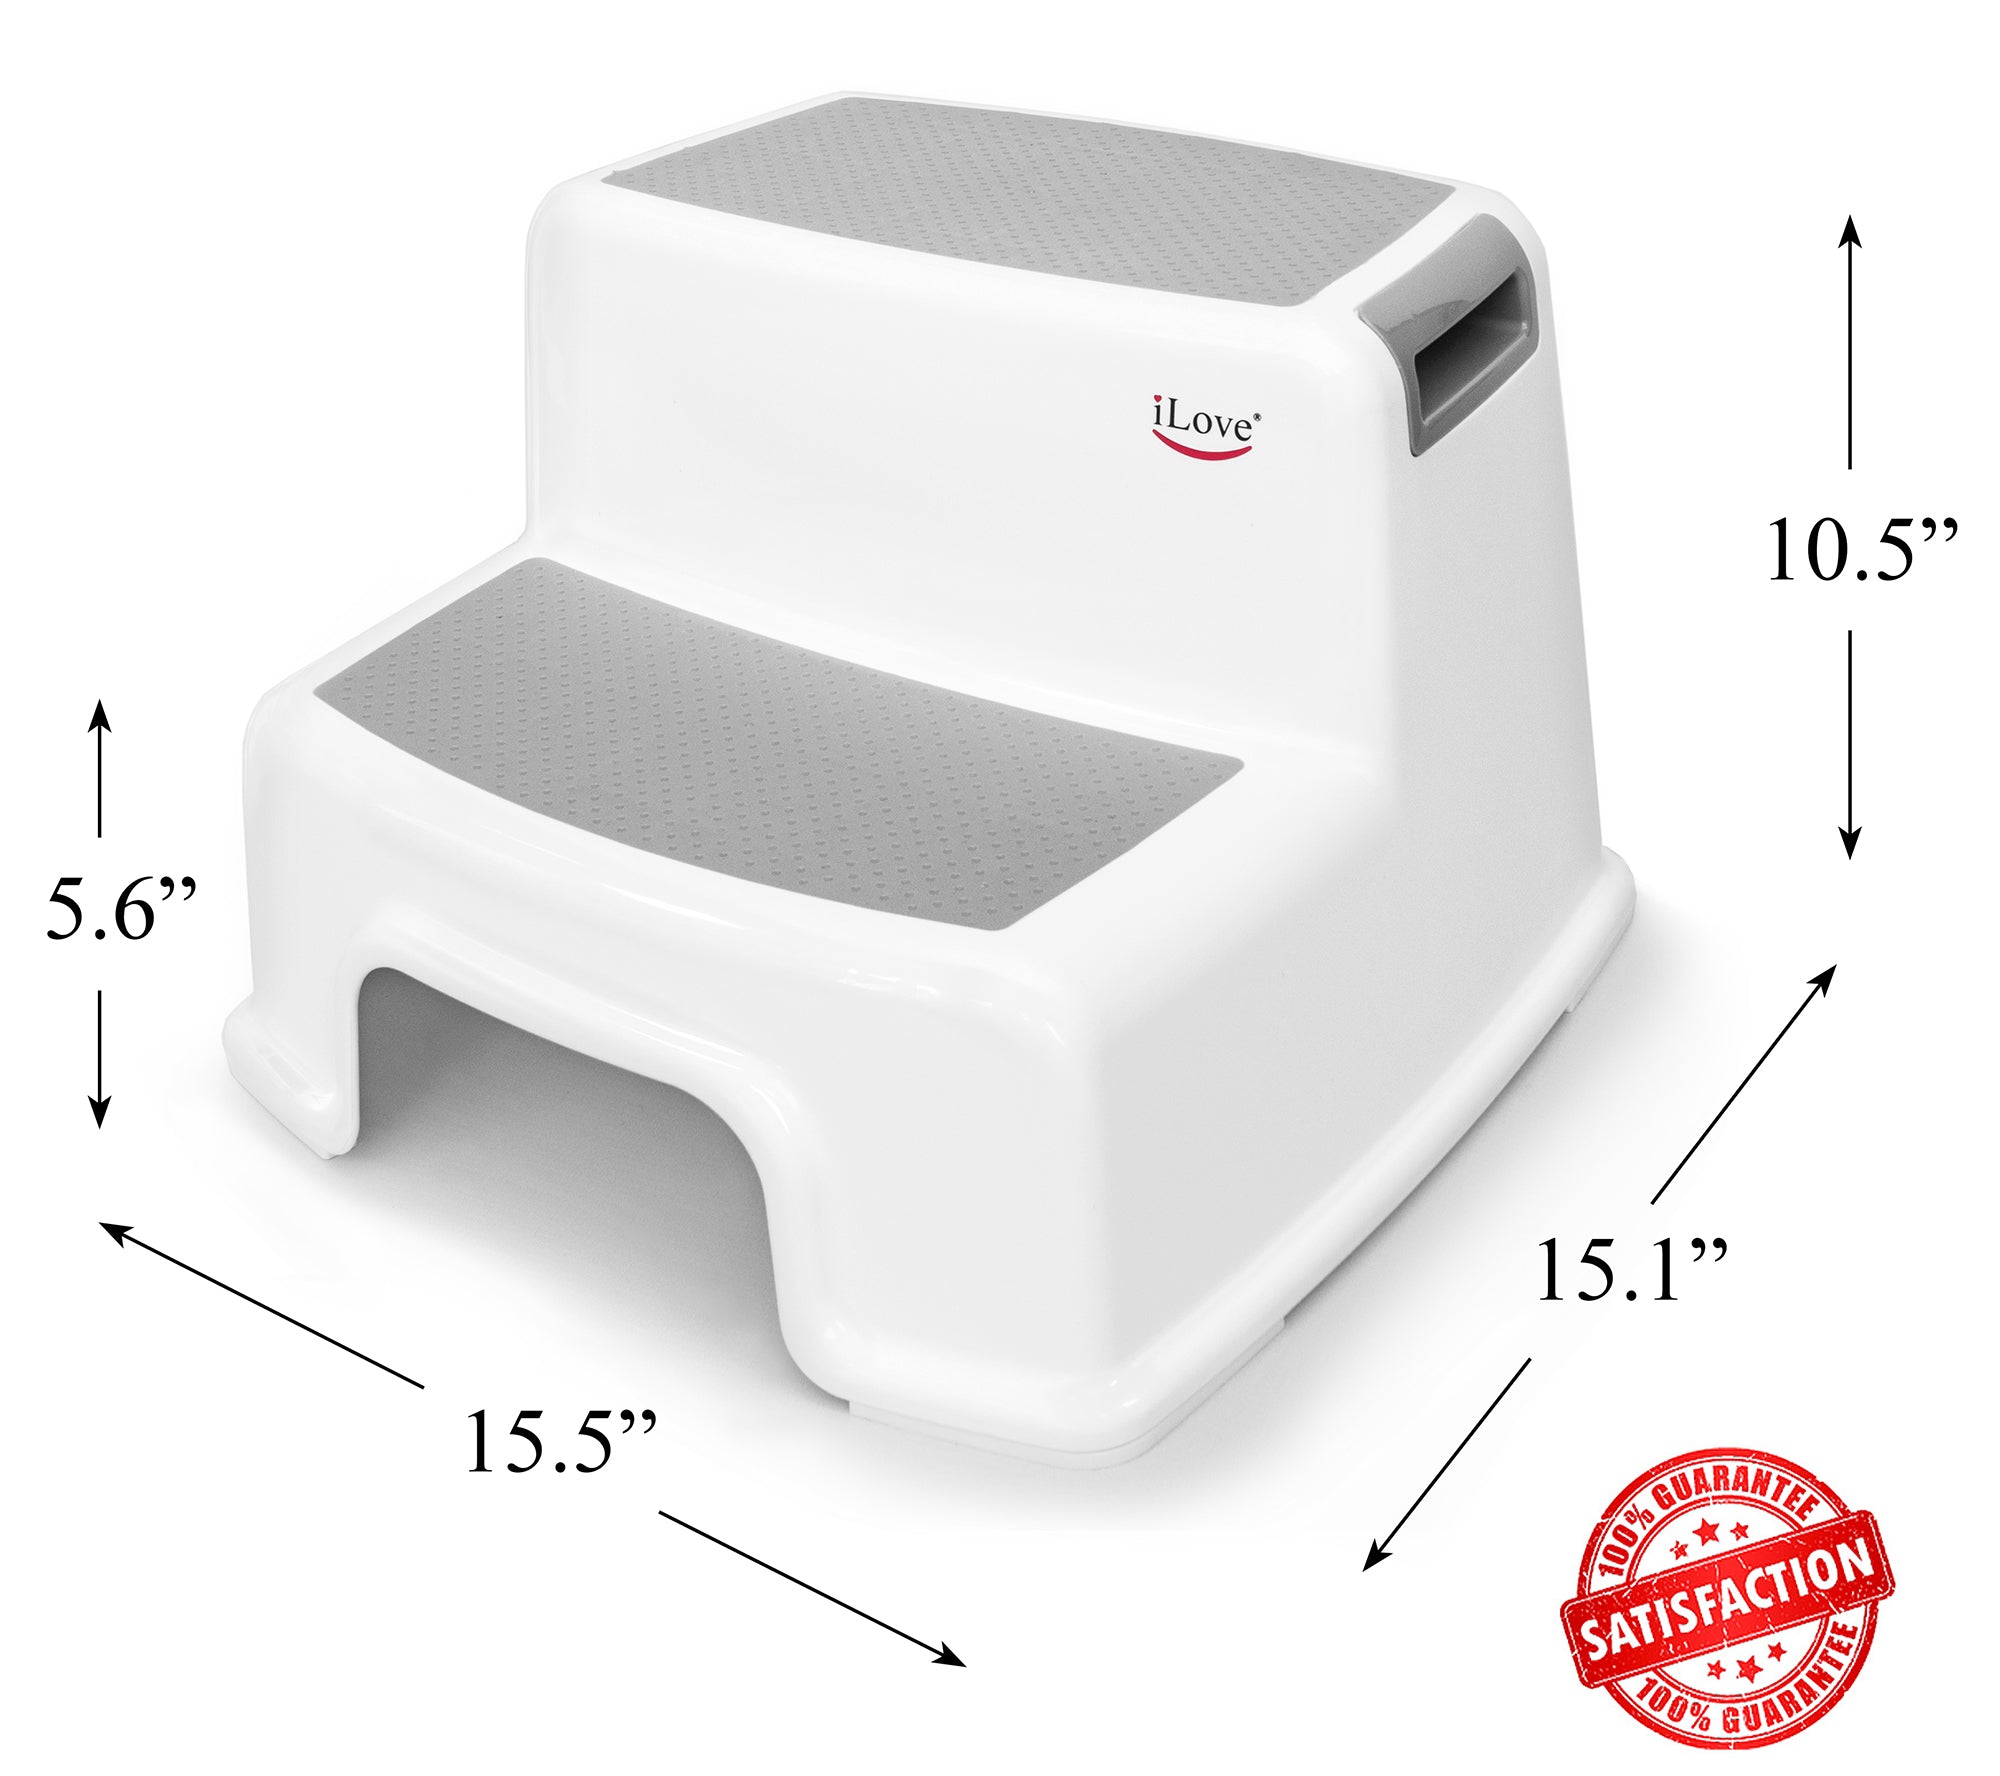 Wide+ 2 Step Stool for Kids | Toddler Stool for Toilet Potty Training | Slip Resistant Soft Grip for Safety as Bathroom Potty Stool and Kitchen Step Stool | Dual Height & Extra Wide Two Step | iLove